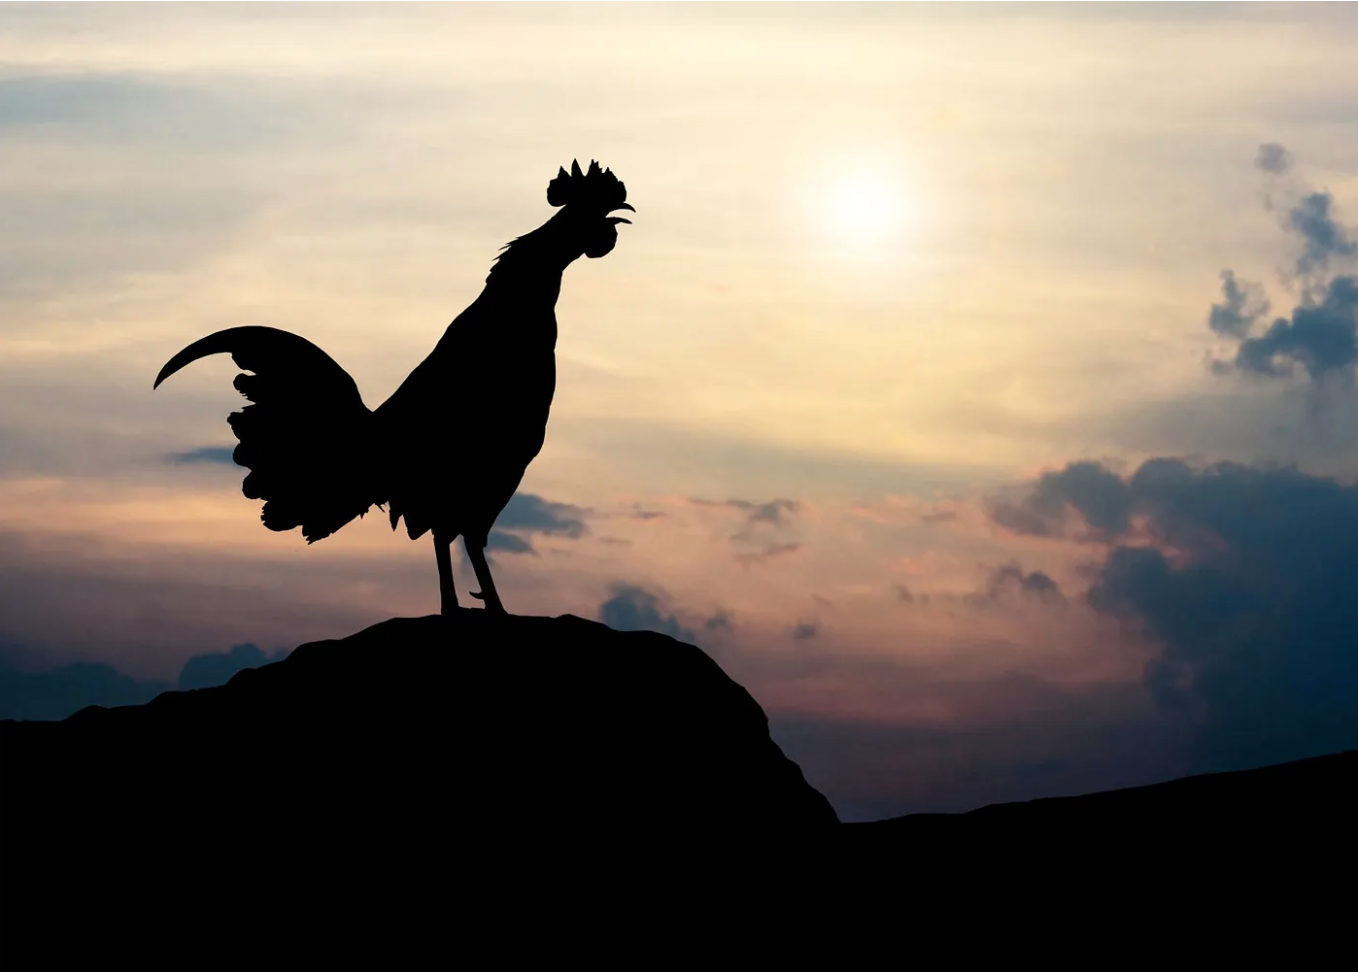 Silhouette of a rooster demonstrating excellence by crowing at sunrise.